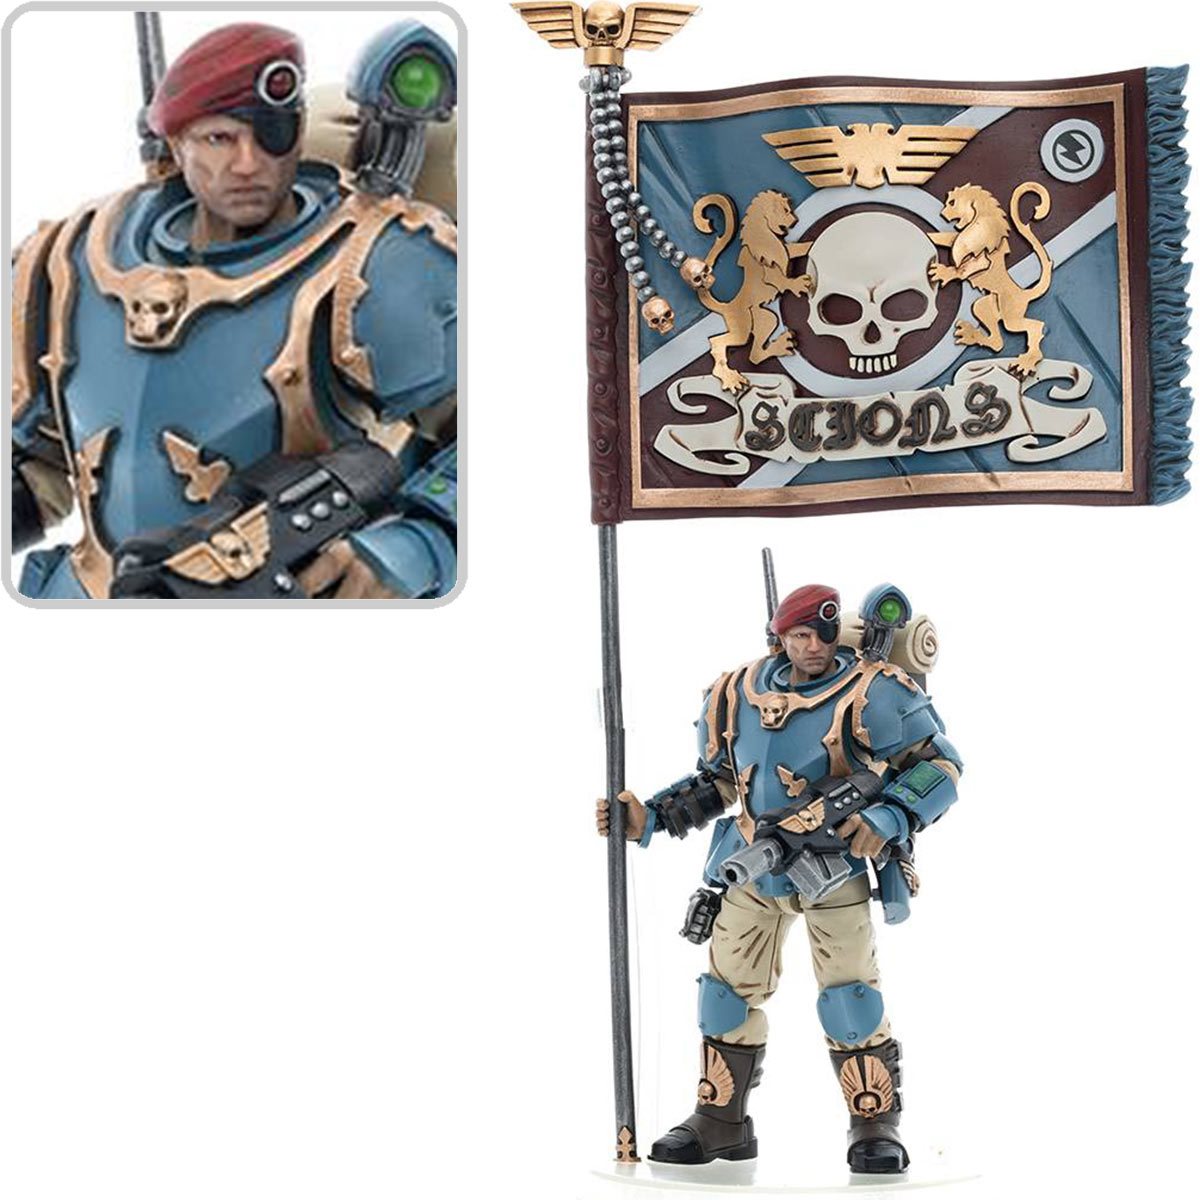 Warhammer 40K Astra Militarum Tempestus Scions Command Squad 55th Kappic Eagles Banner Bearer 1/18 Scale Figure